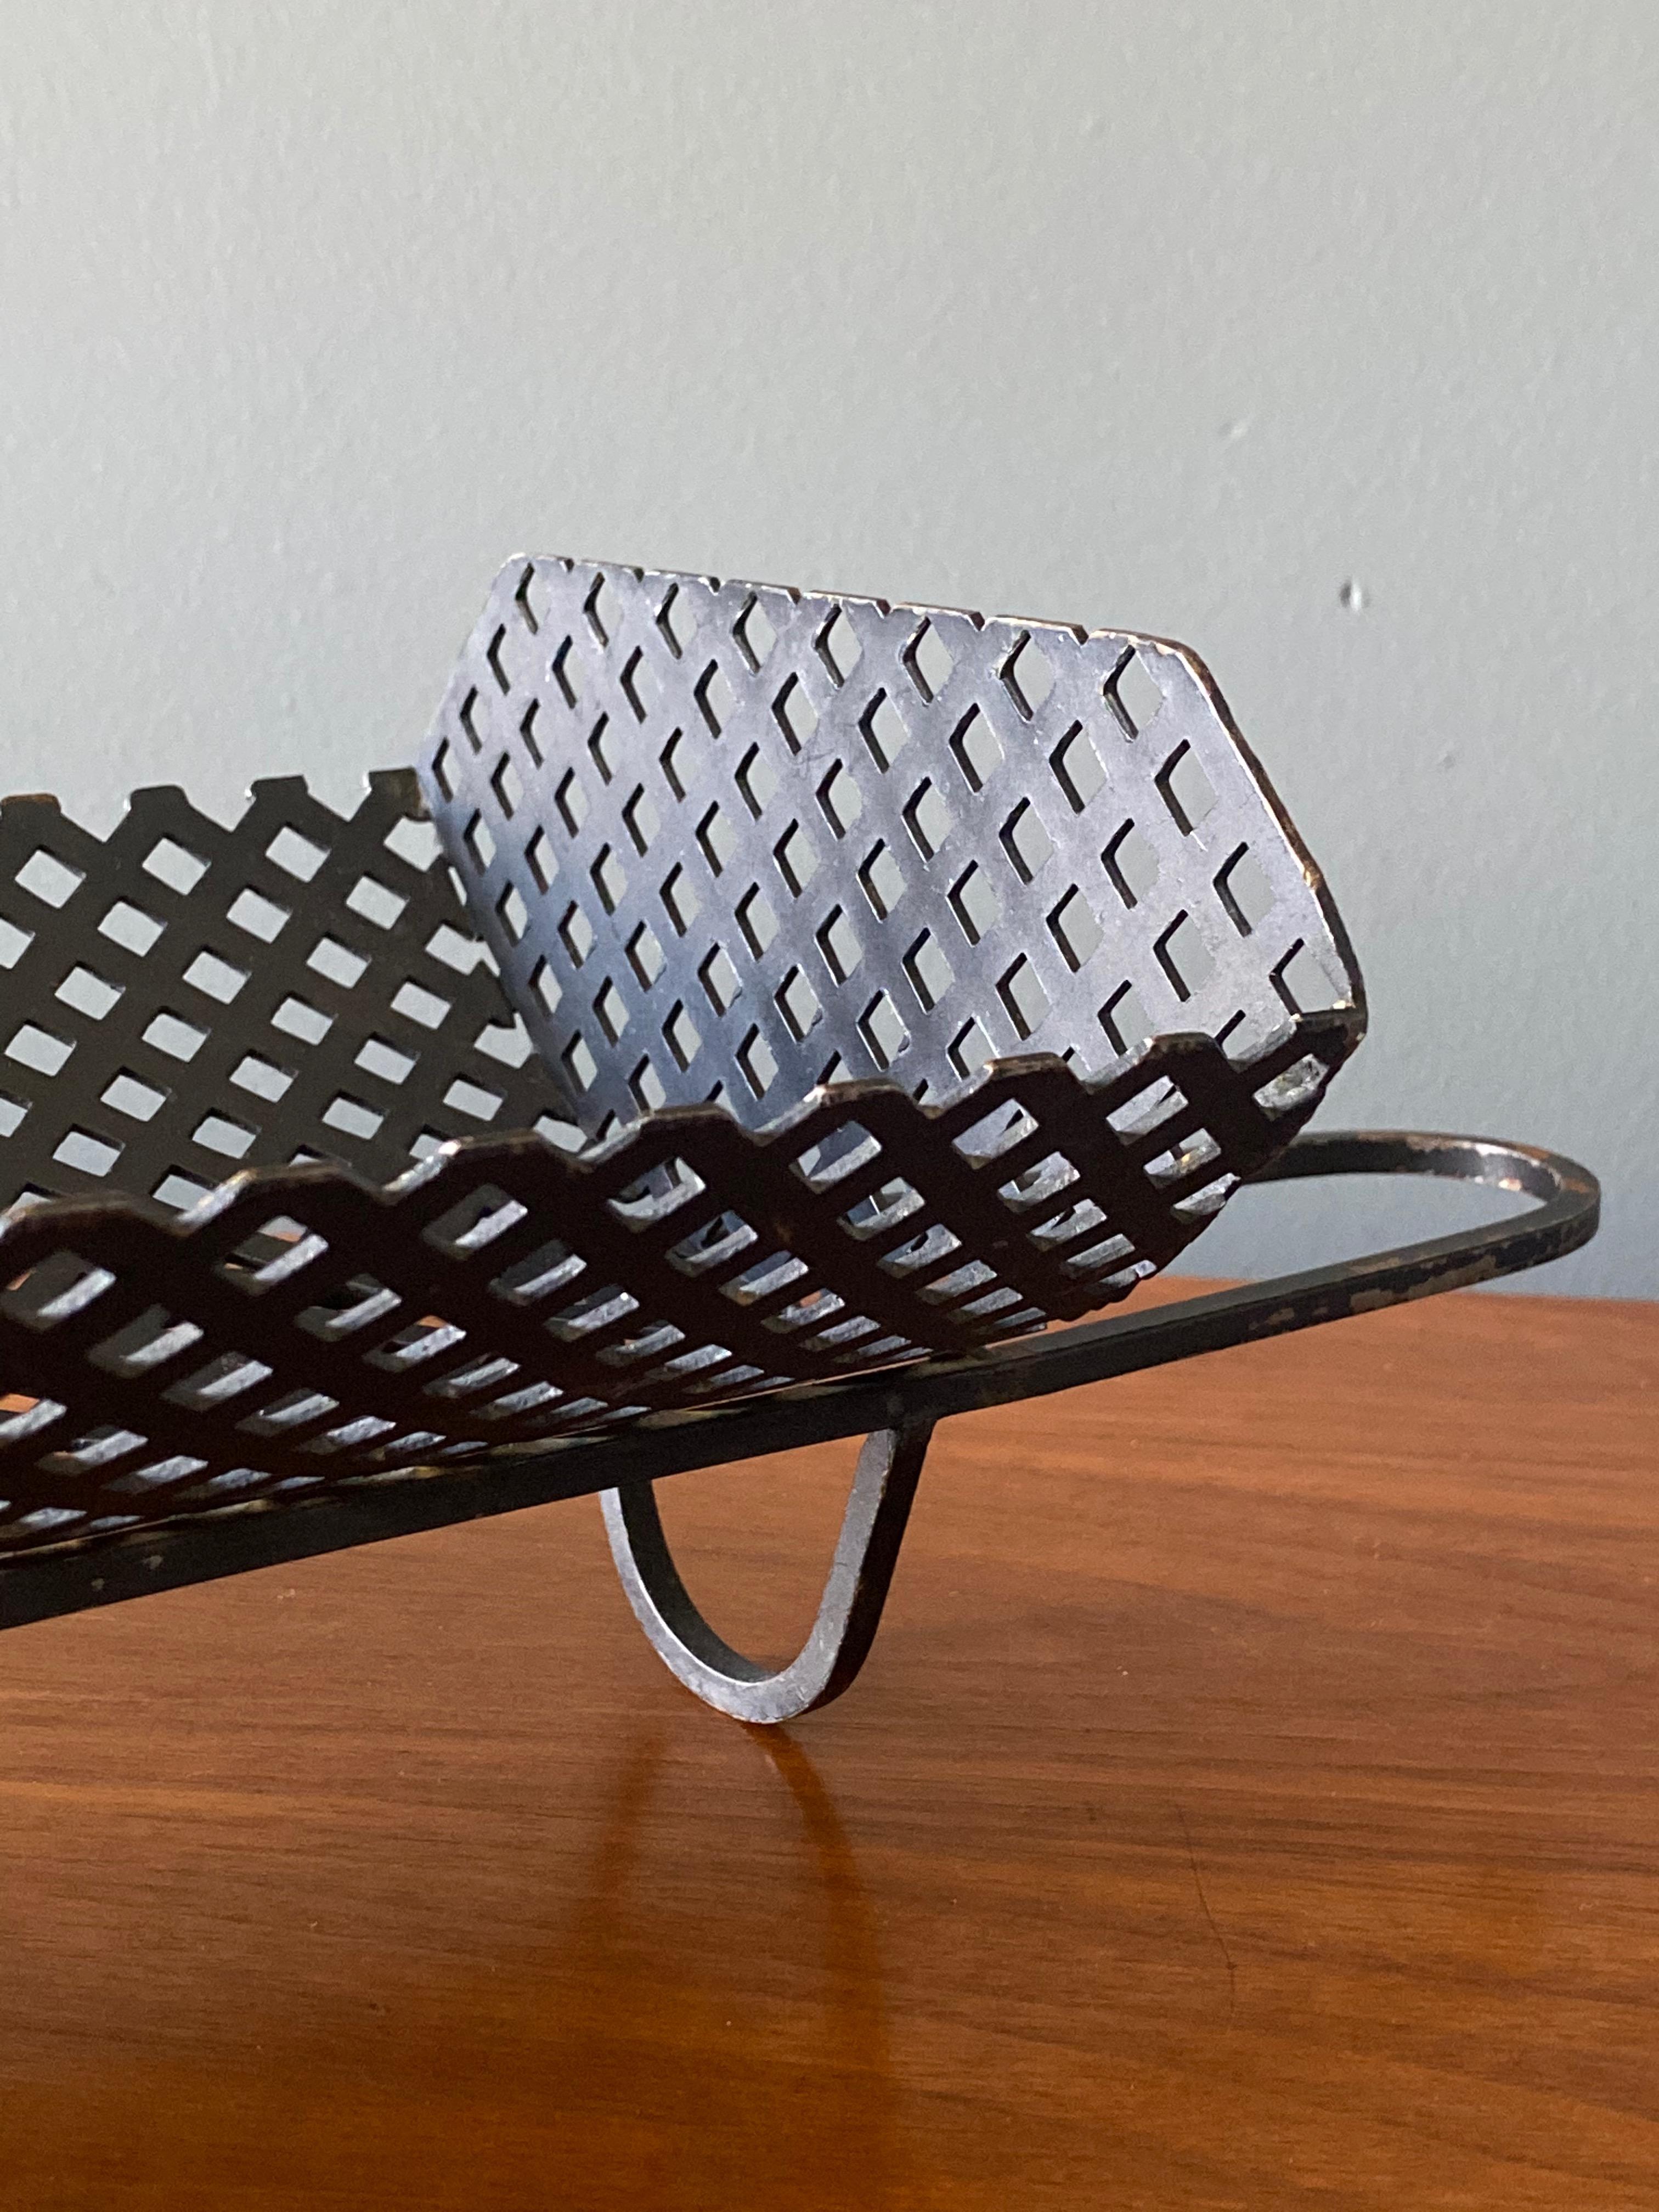 20th Century Vintage Perforated Metal Catch-All/Envelope Tray